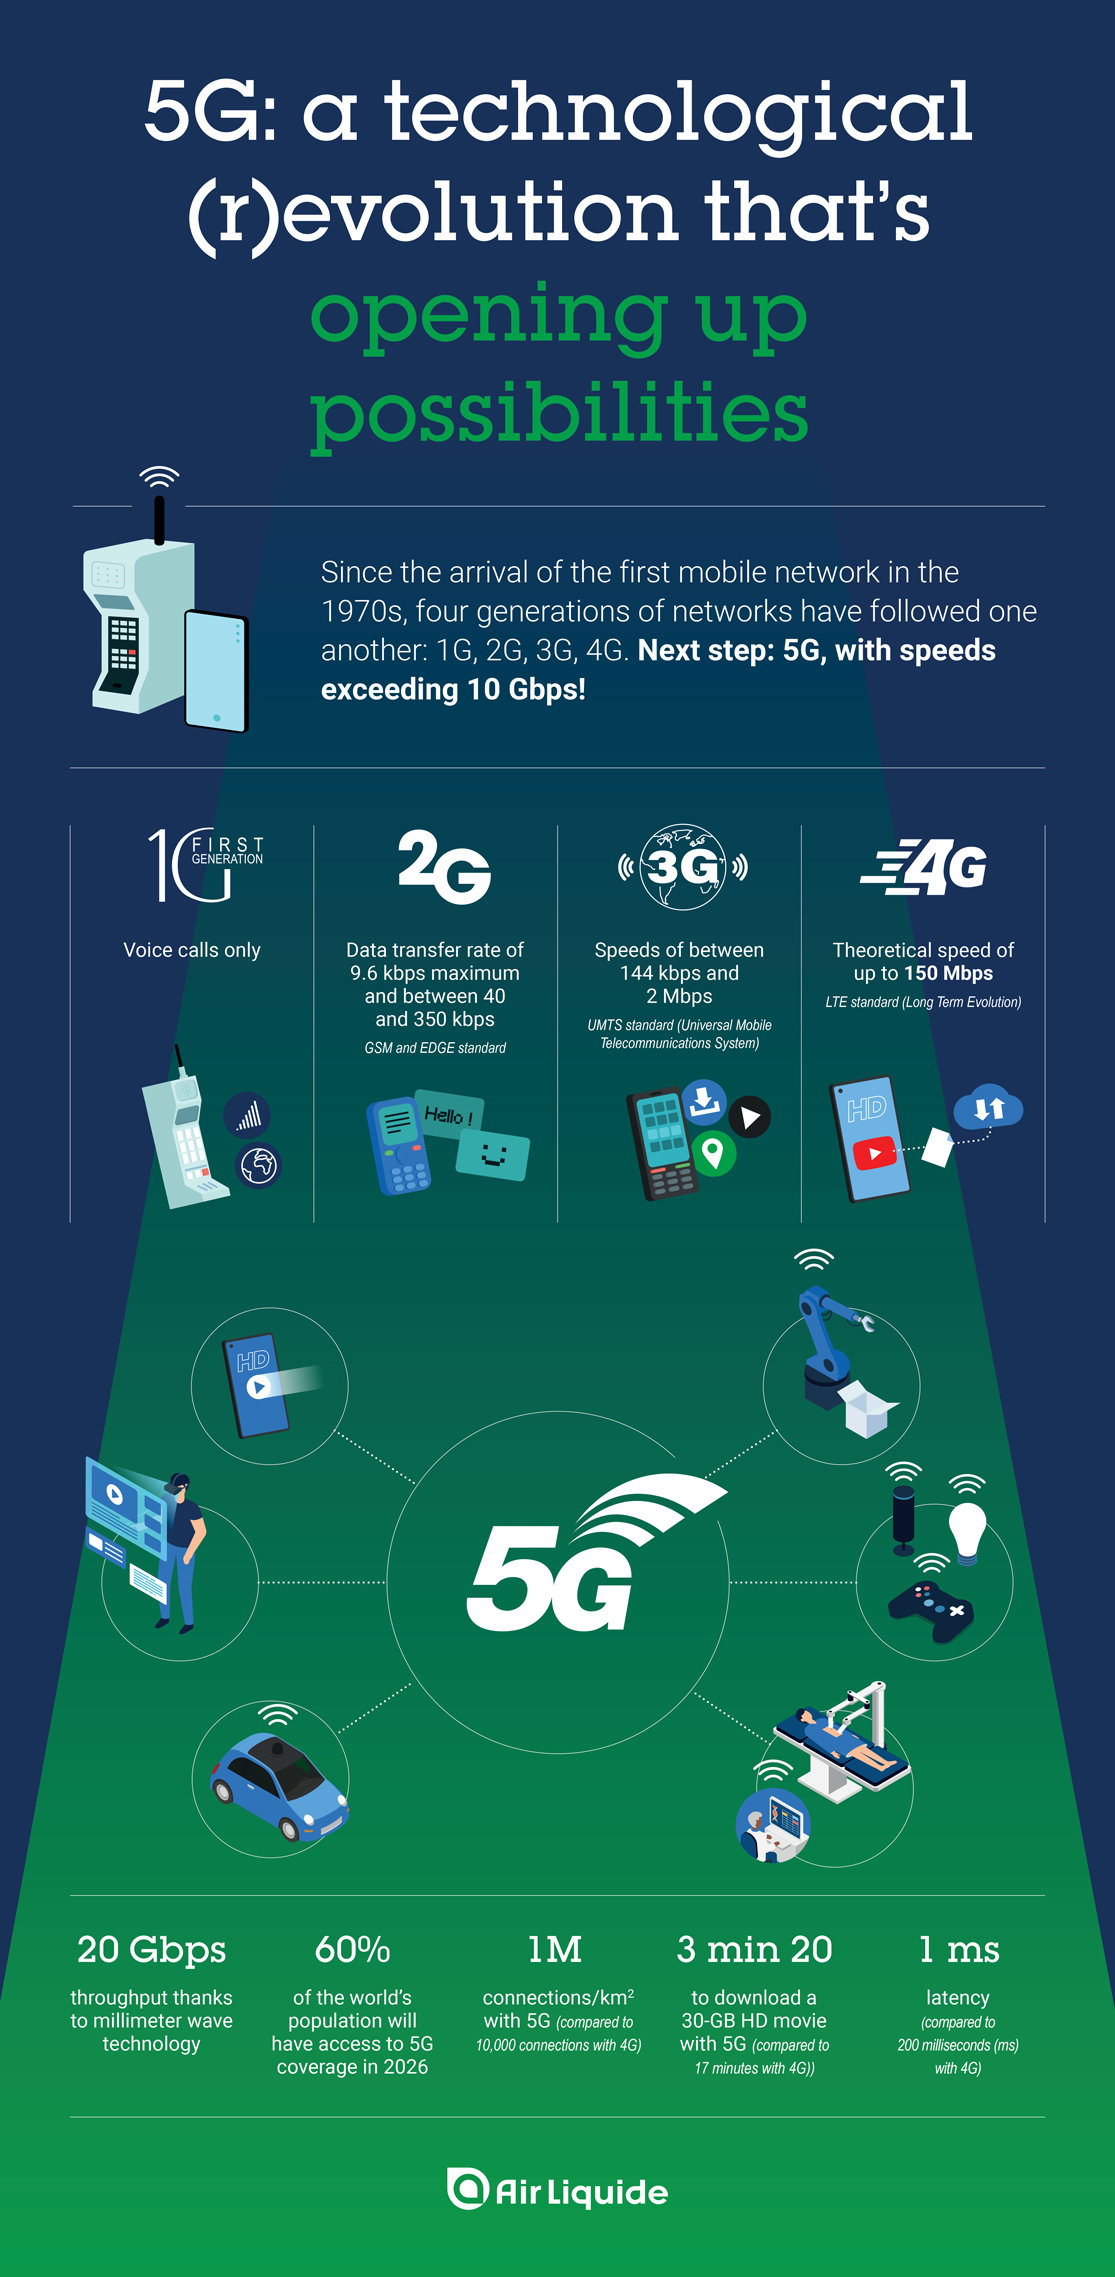 Main differences between 4G and 5G